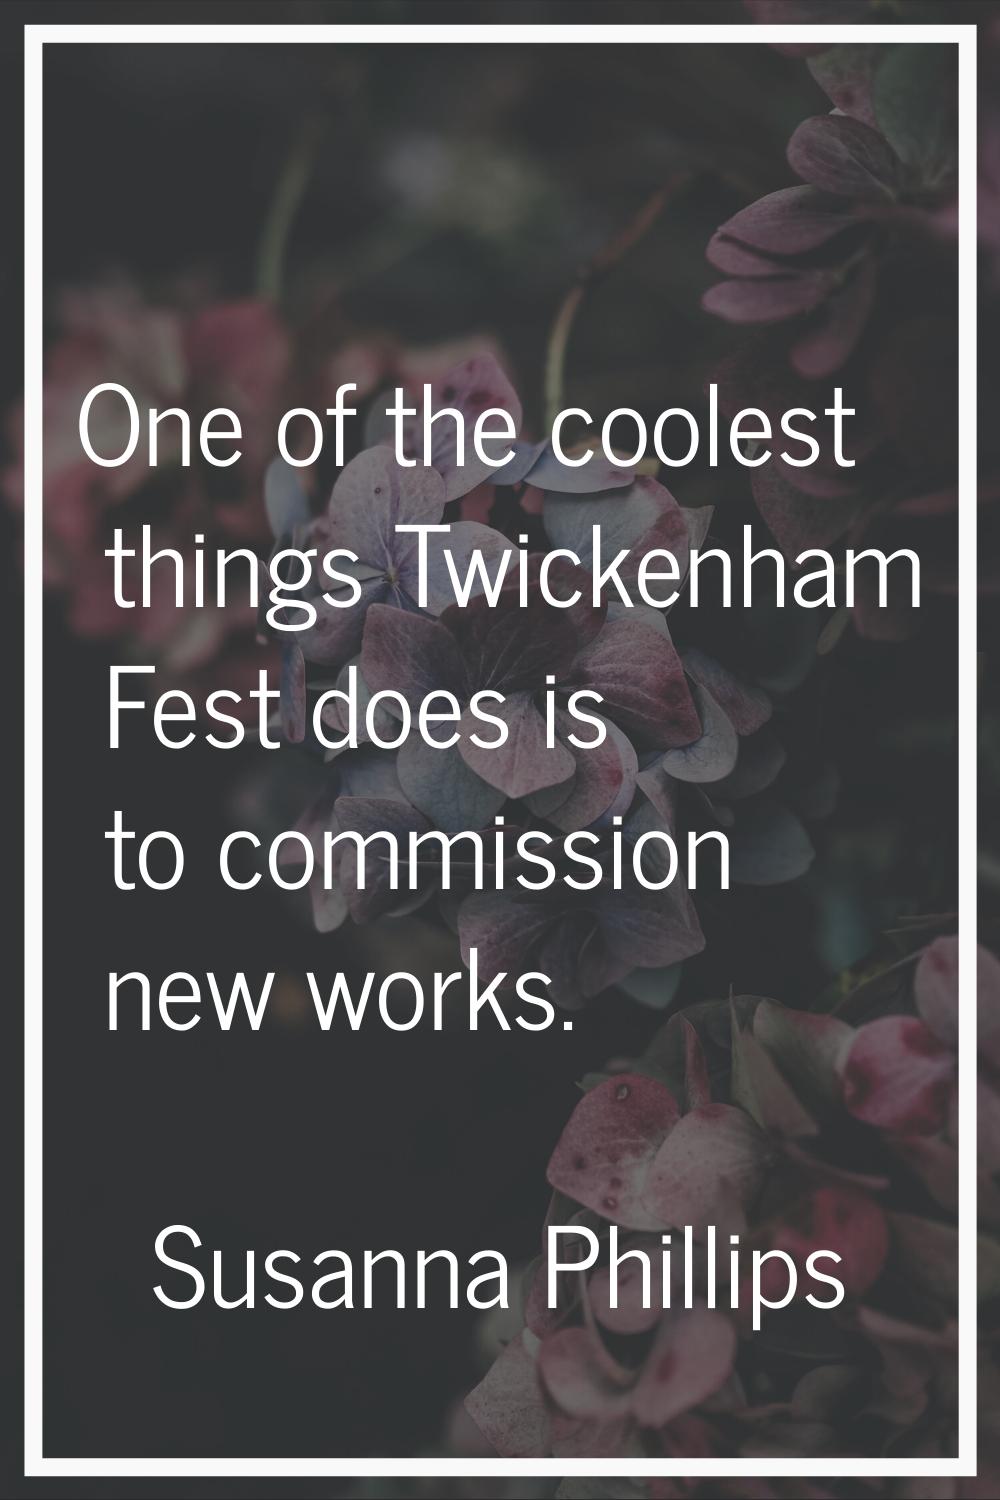 One of the coolest things Twickenham Fest does is to commission new works.